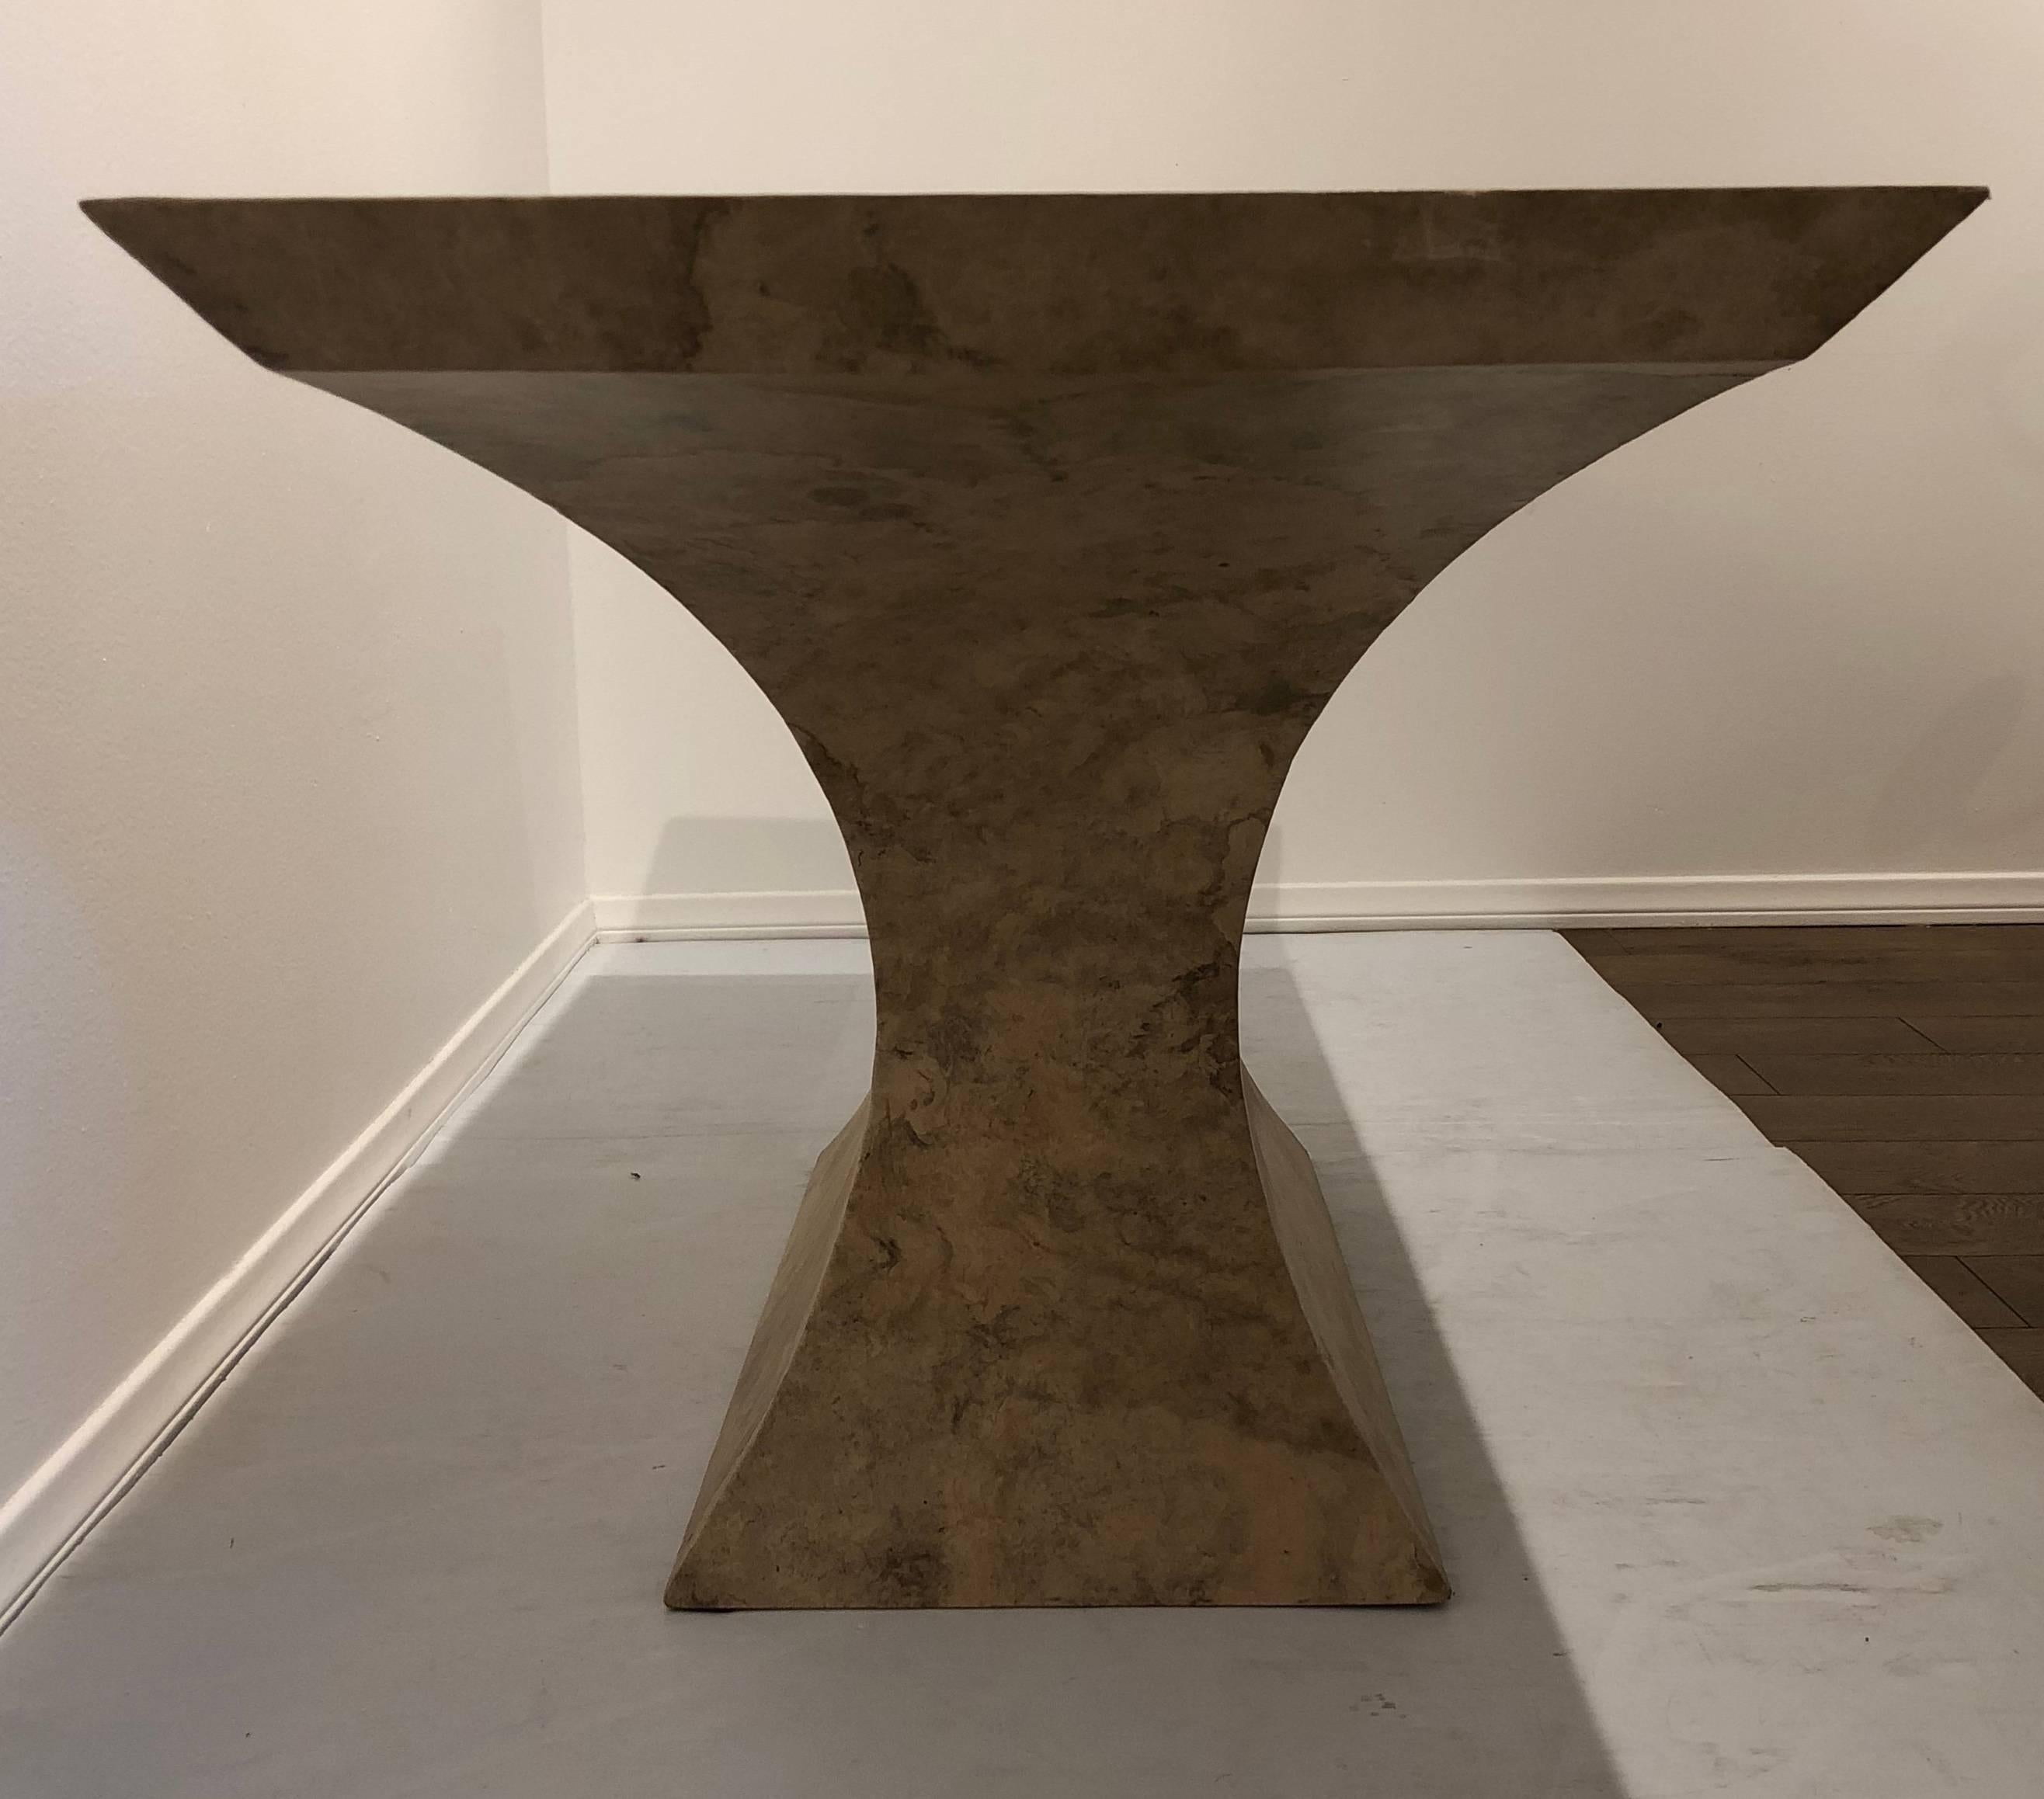 Perfect for a conference table, dining table or sofa table, base in a faux marble finish can take a glass top or marble or traventine top or wood top can be an oval a rectangle or cut to the edge for a sofa table, this base has many uses.